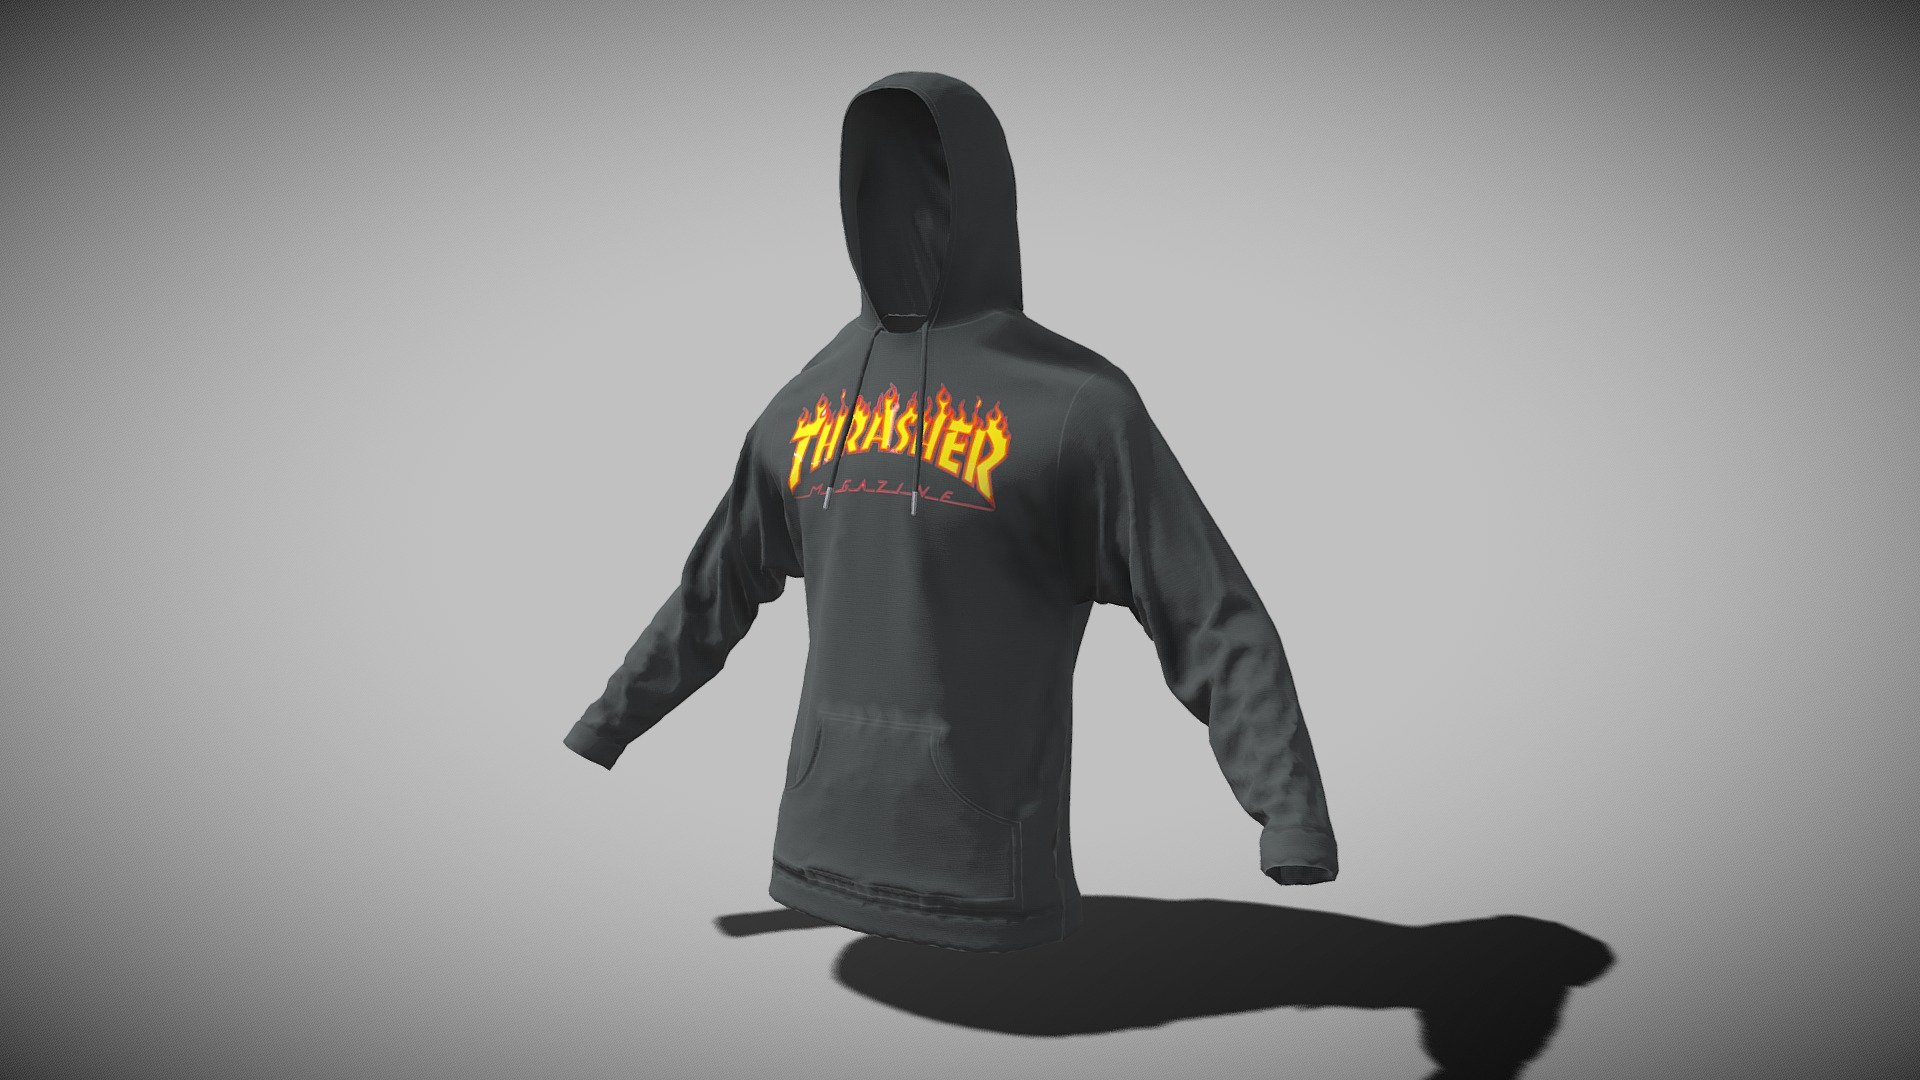 Trasher Skateboard Magazine Hoodie made in marvelous designer and reworked in blender.
This  model comes in variety of file format! 
Alembic, FBX, OBJ, Blend, Gltf, Stl!

All the Marvelous Designer files are available in the archive.

This model is available in 3 levels of detail!
LowPoly: Verts: 2897 Tris:5836
Mid: Verts: 11594 Tris:22231
High: Verts: 31472 Tris:63706

All my models are made with love for you to enjoy!
Cheers! - Trasher Skater Hoodie - Buy Royalty Free 3D model by DGNS (@GuillaumeDGNS) 3d model